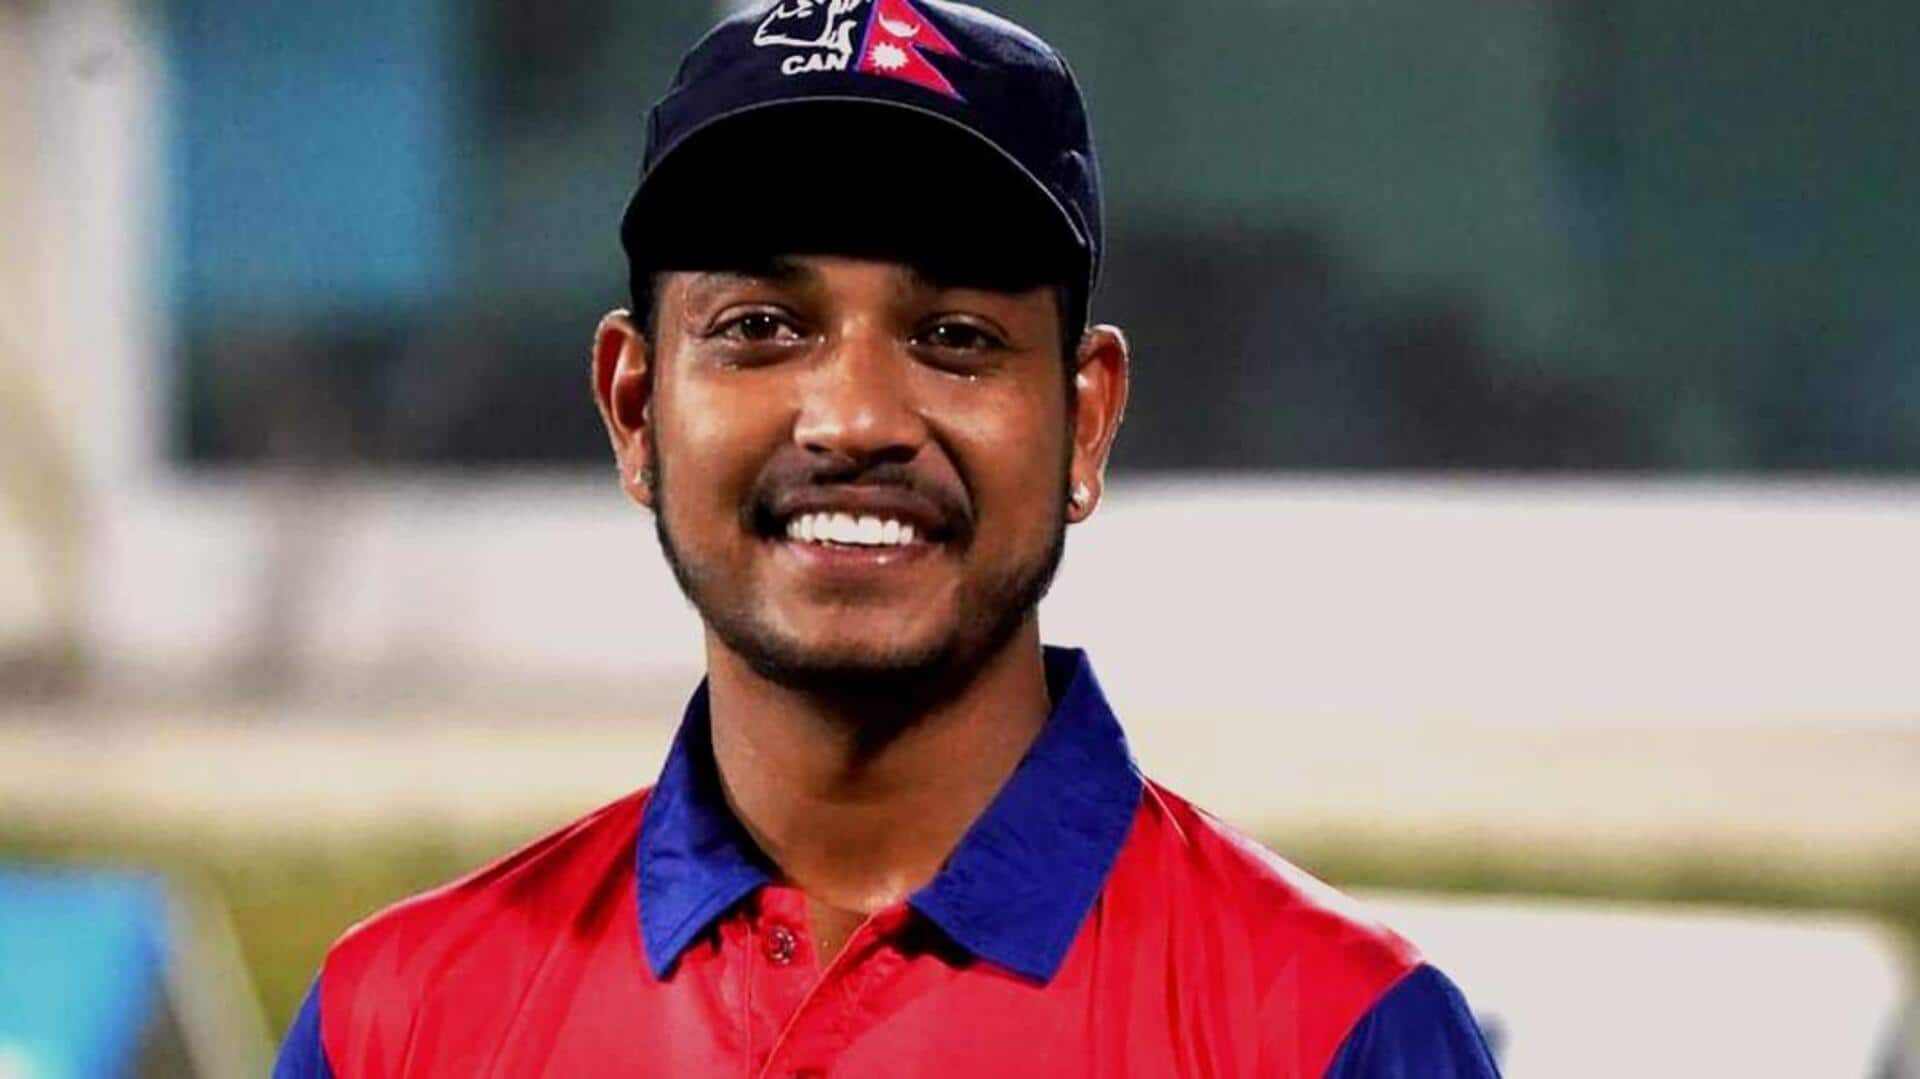 Nepal's Sandeep Lamichhane sentenced to eight years in prison: Details